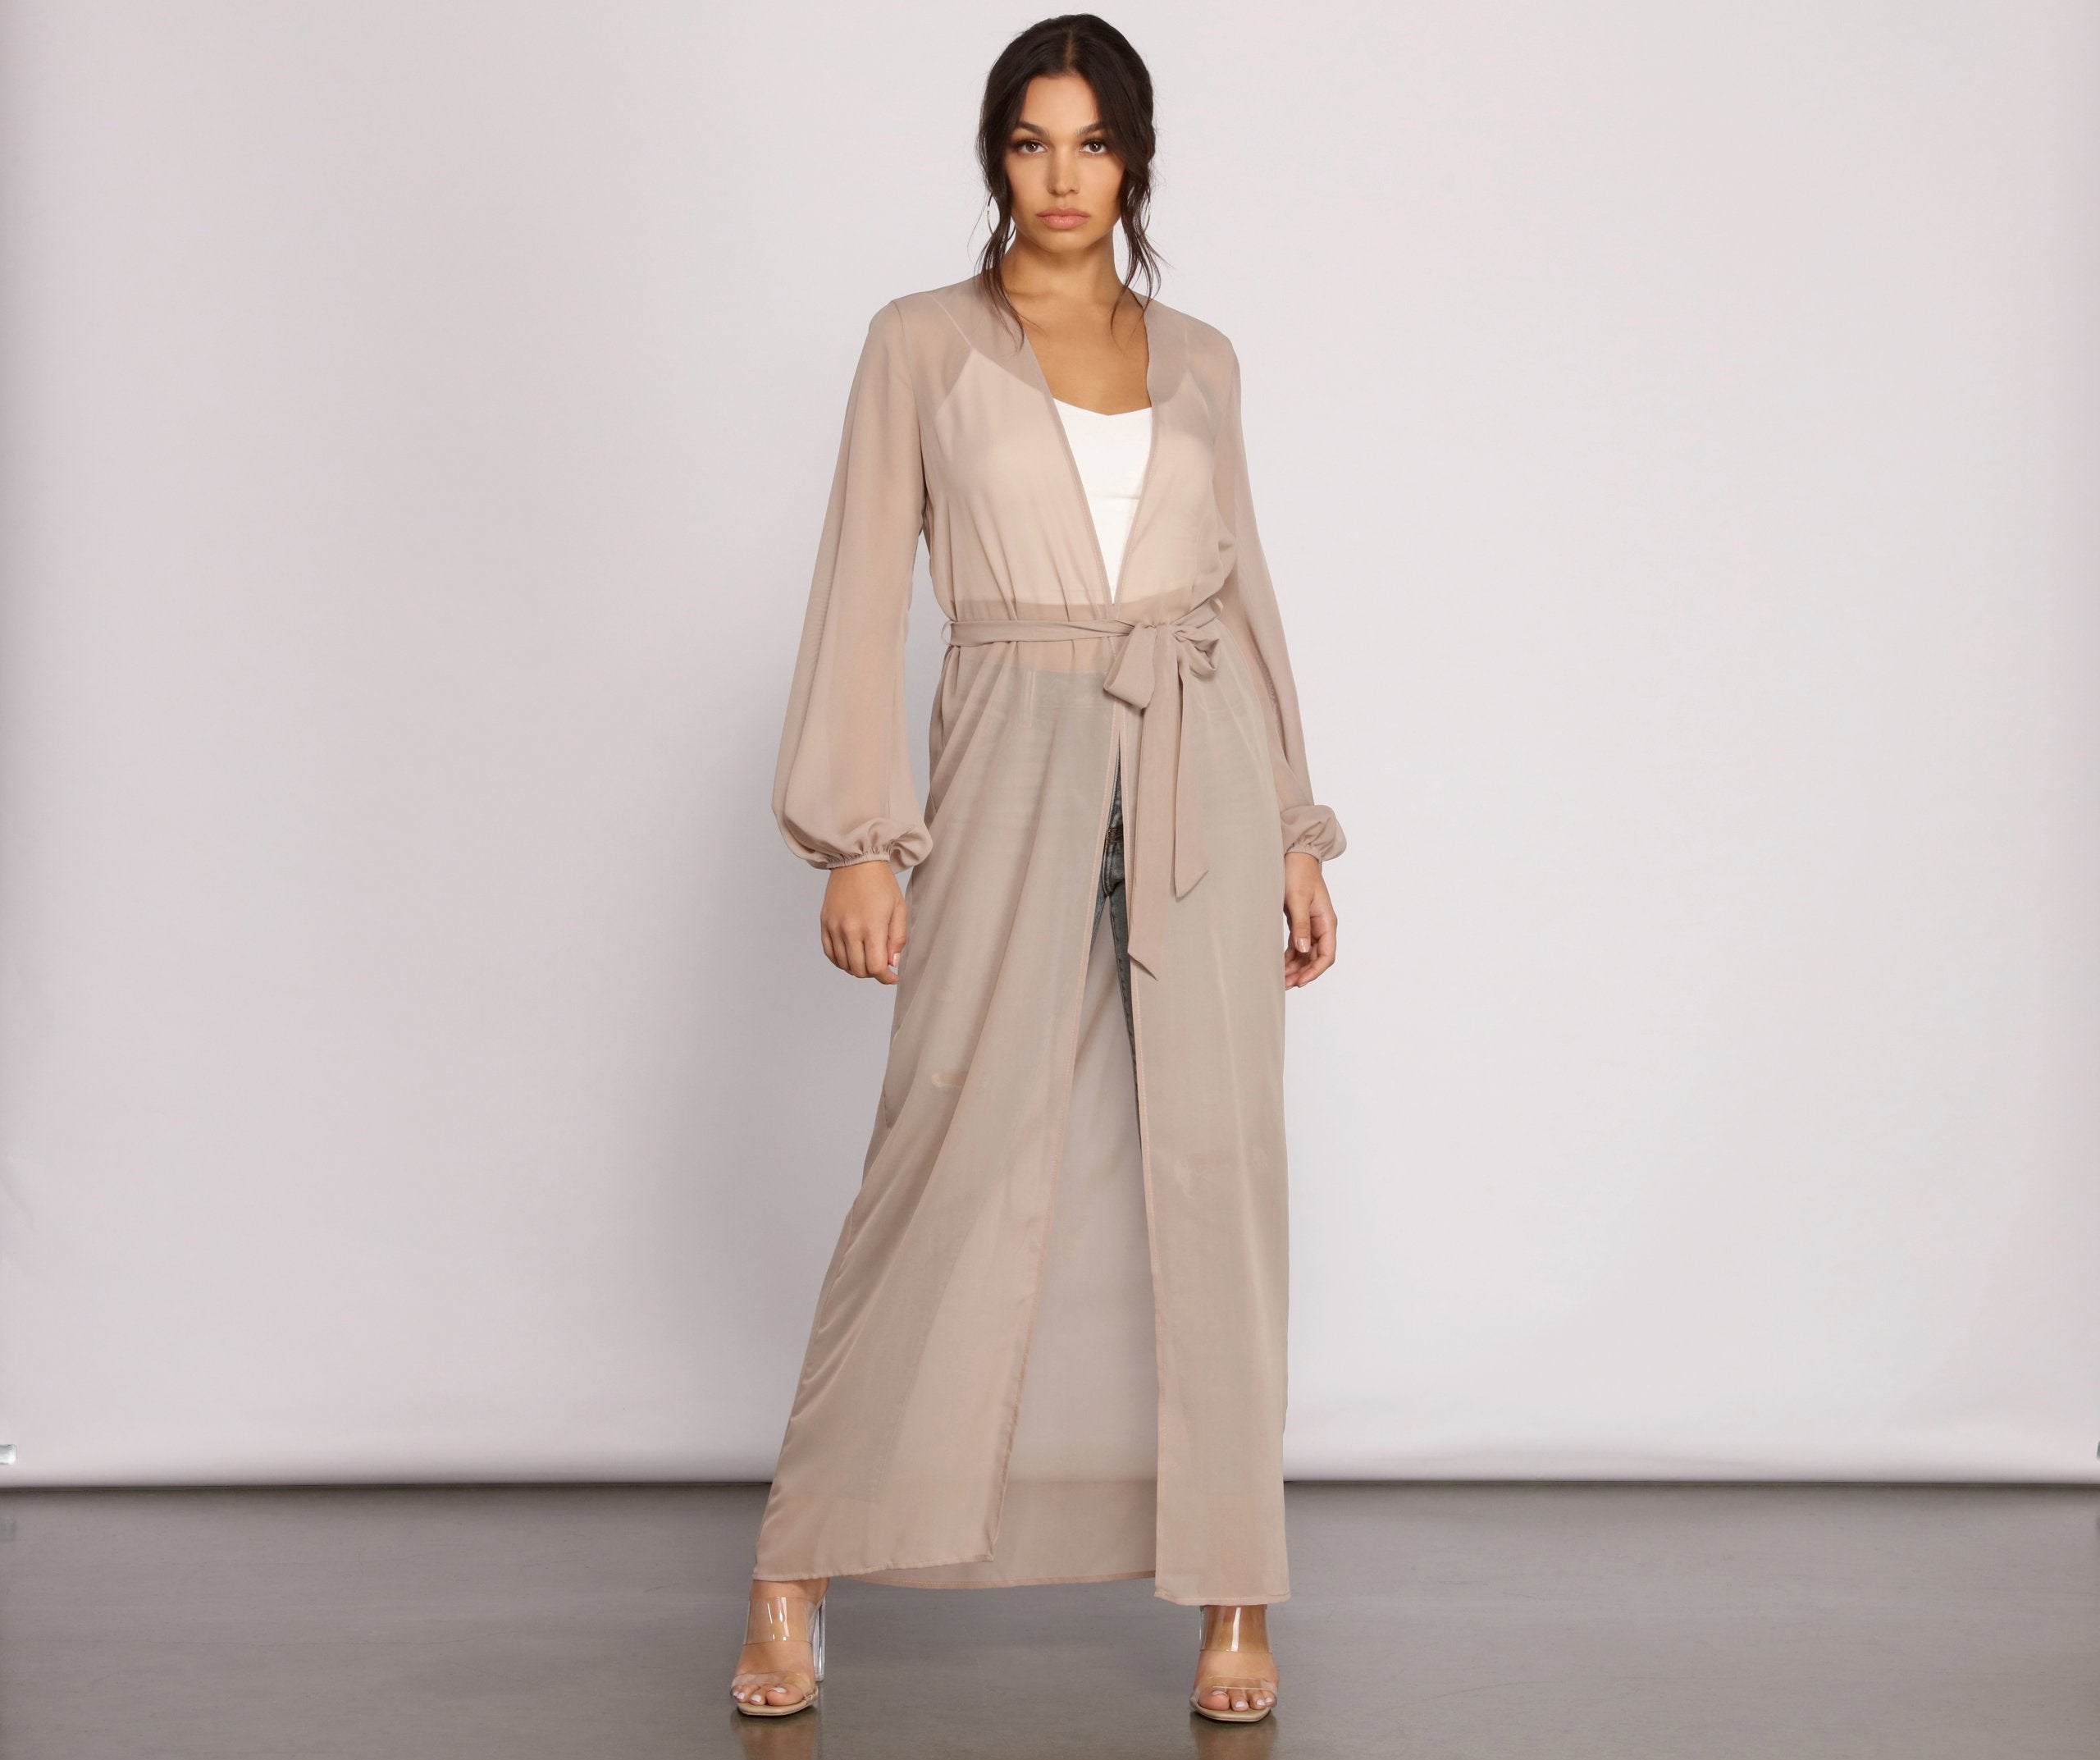 Chic Chiffon Tie Front Duster - Lady Occasions